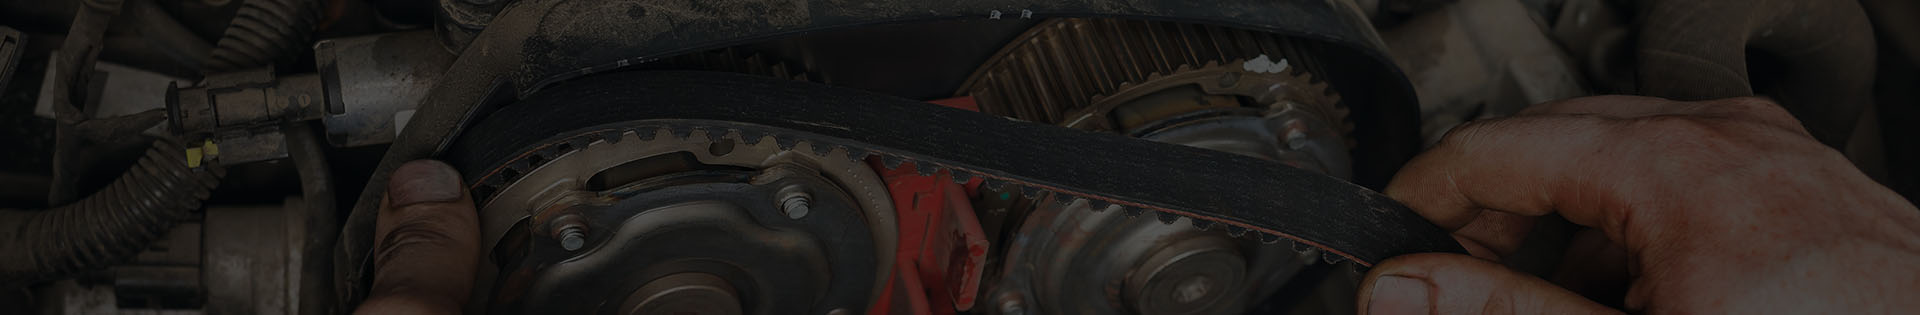 Timing Belt Replacement in Albany, CA - Adams Autoworx Albany